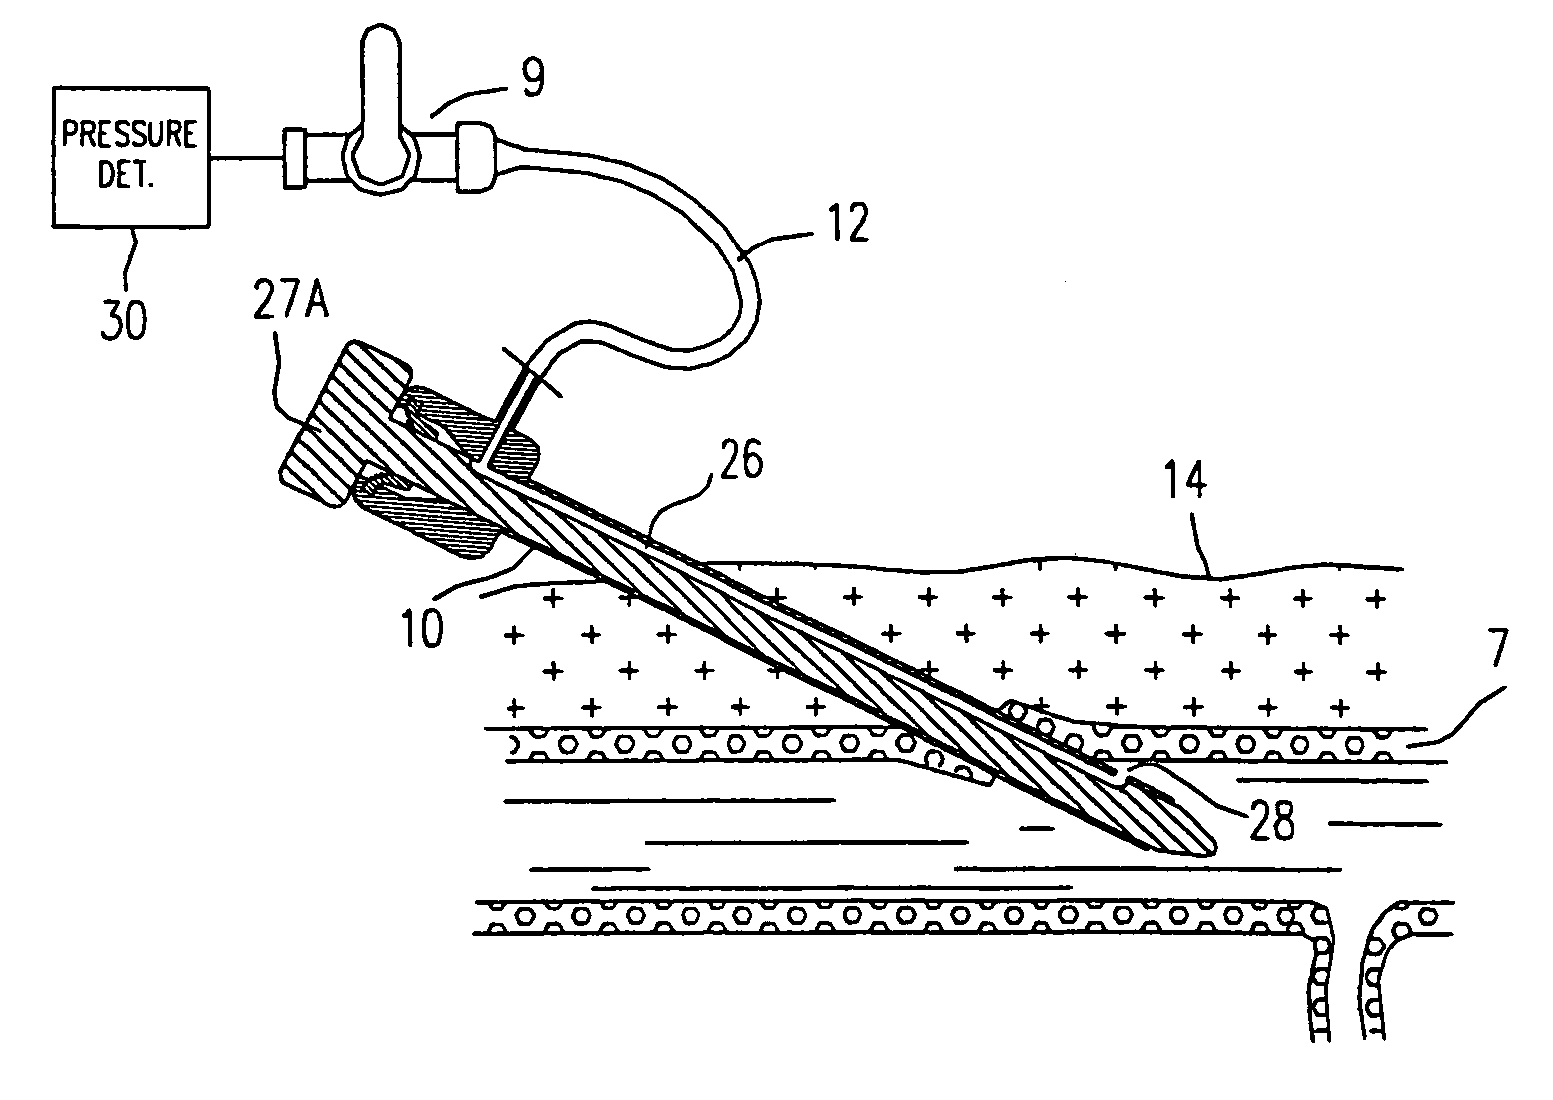 Technique to confirm correct positioning of arterial wall sealing device